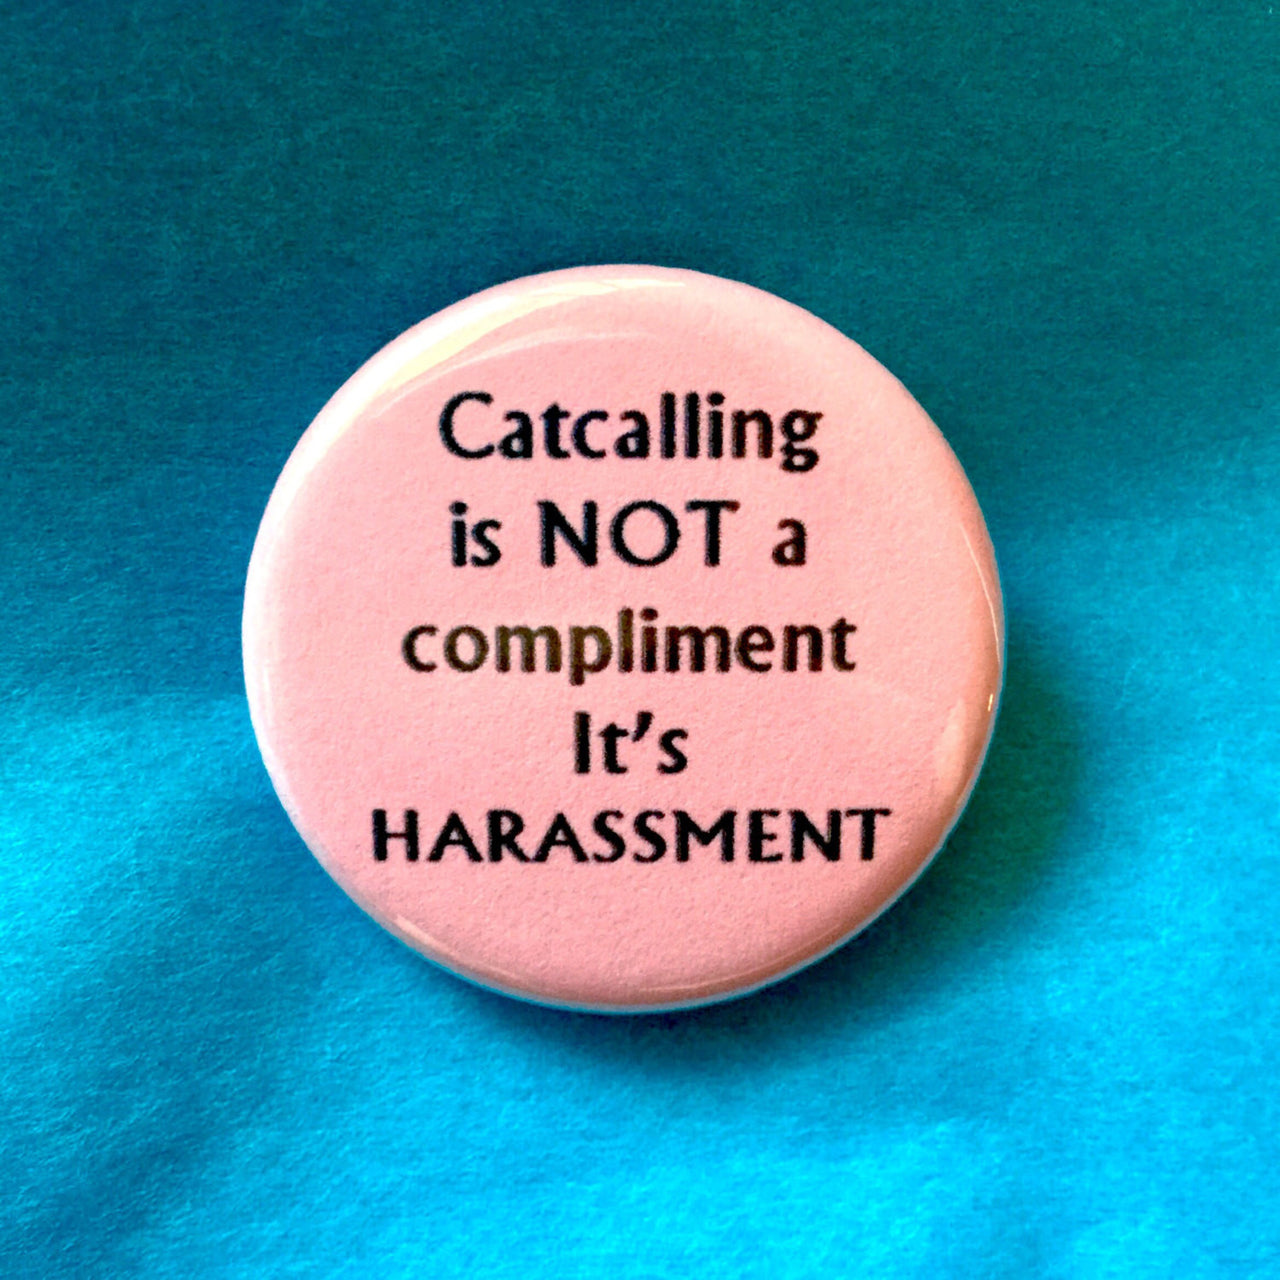 Catcalling is not a compliment, it's harassment - Radical Buttons